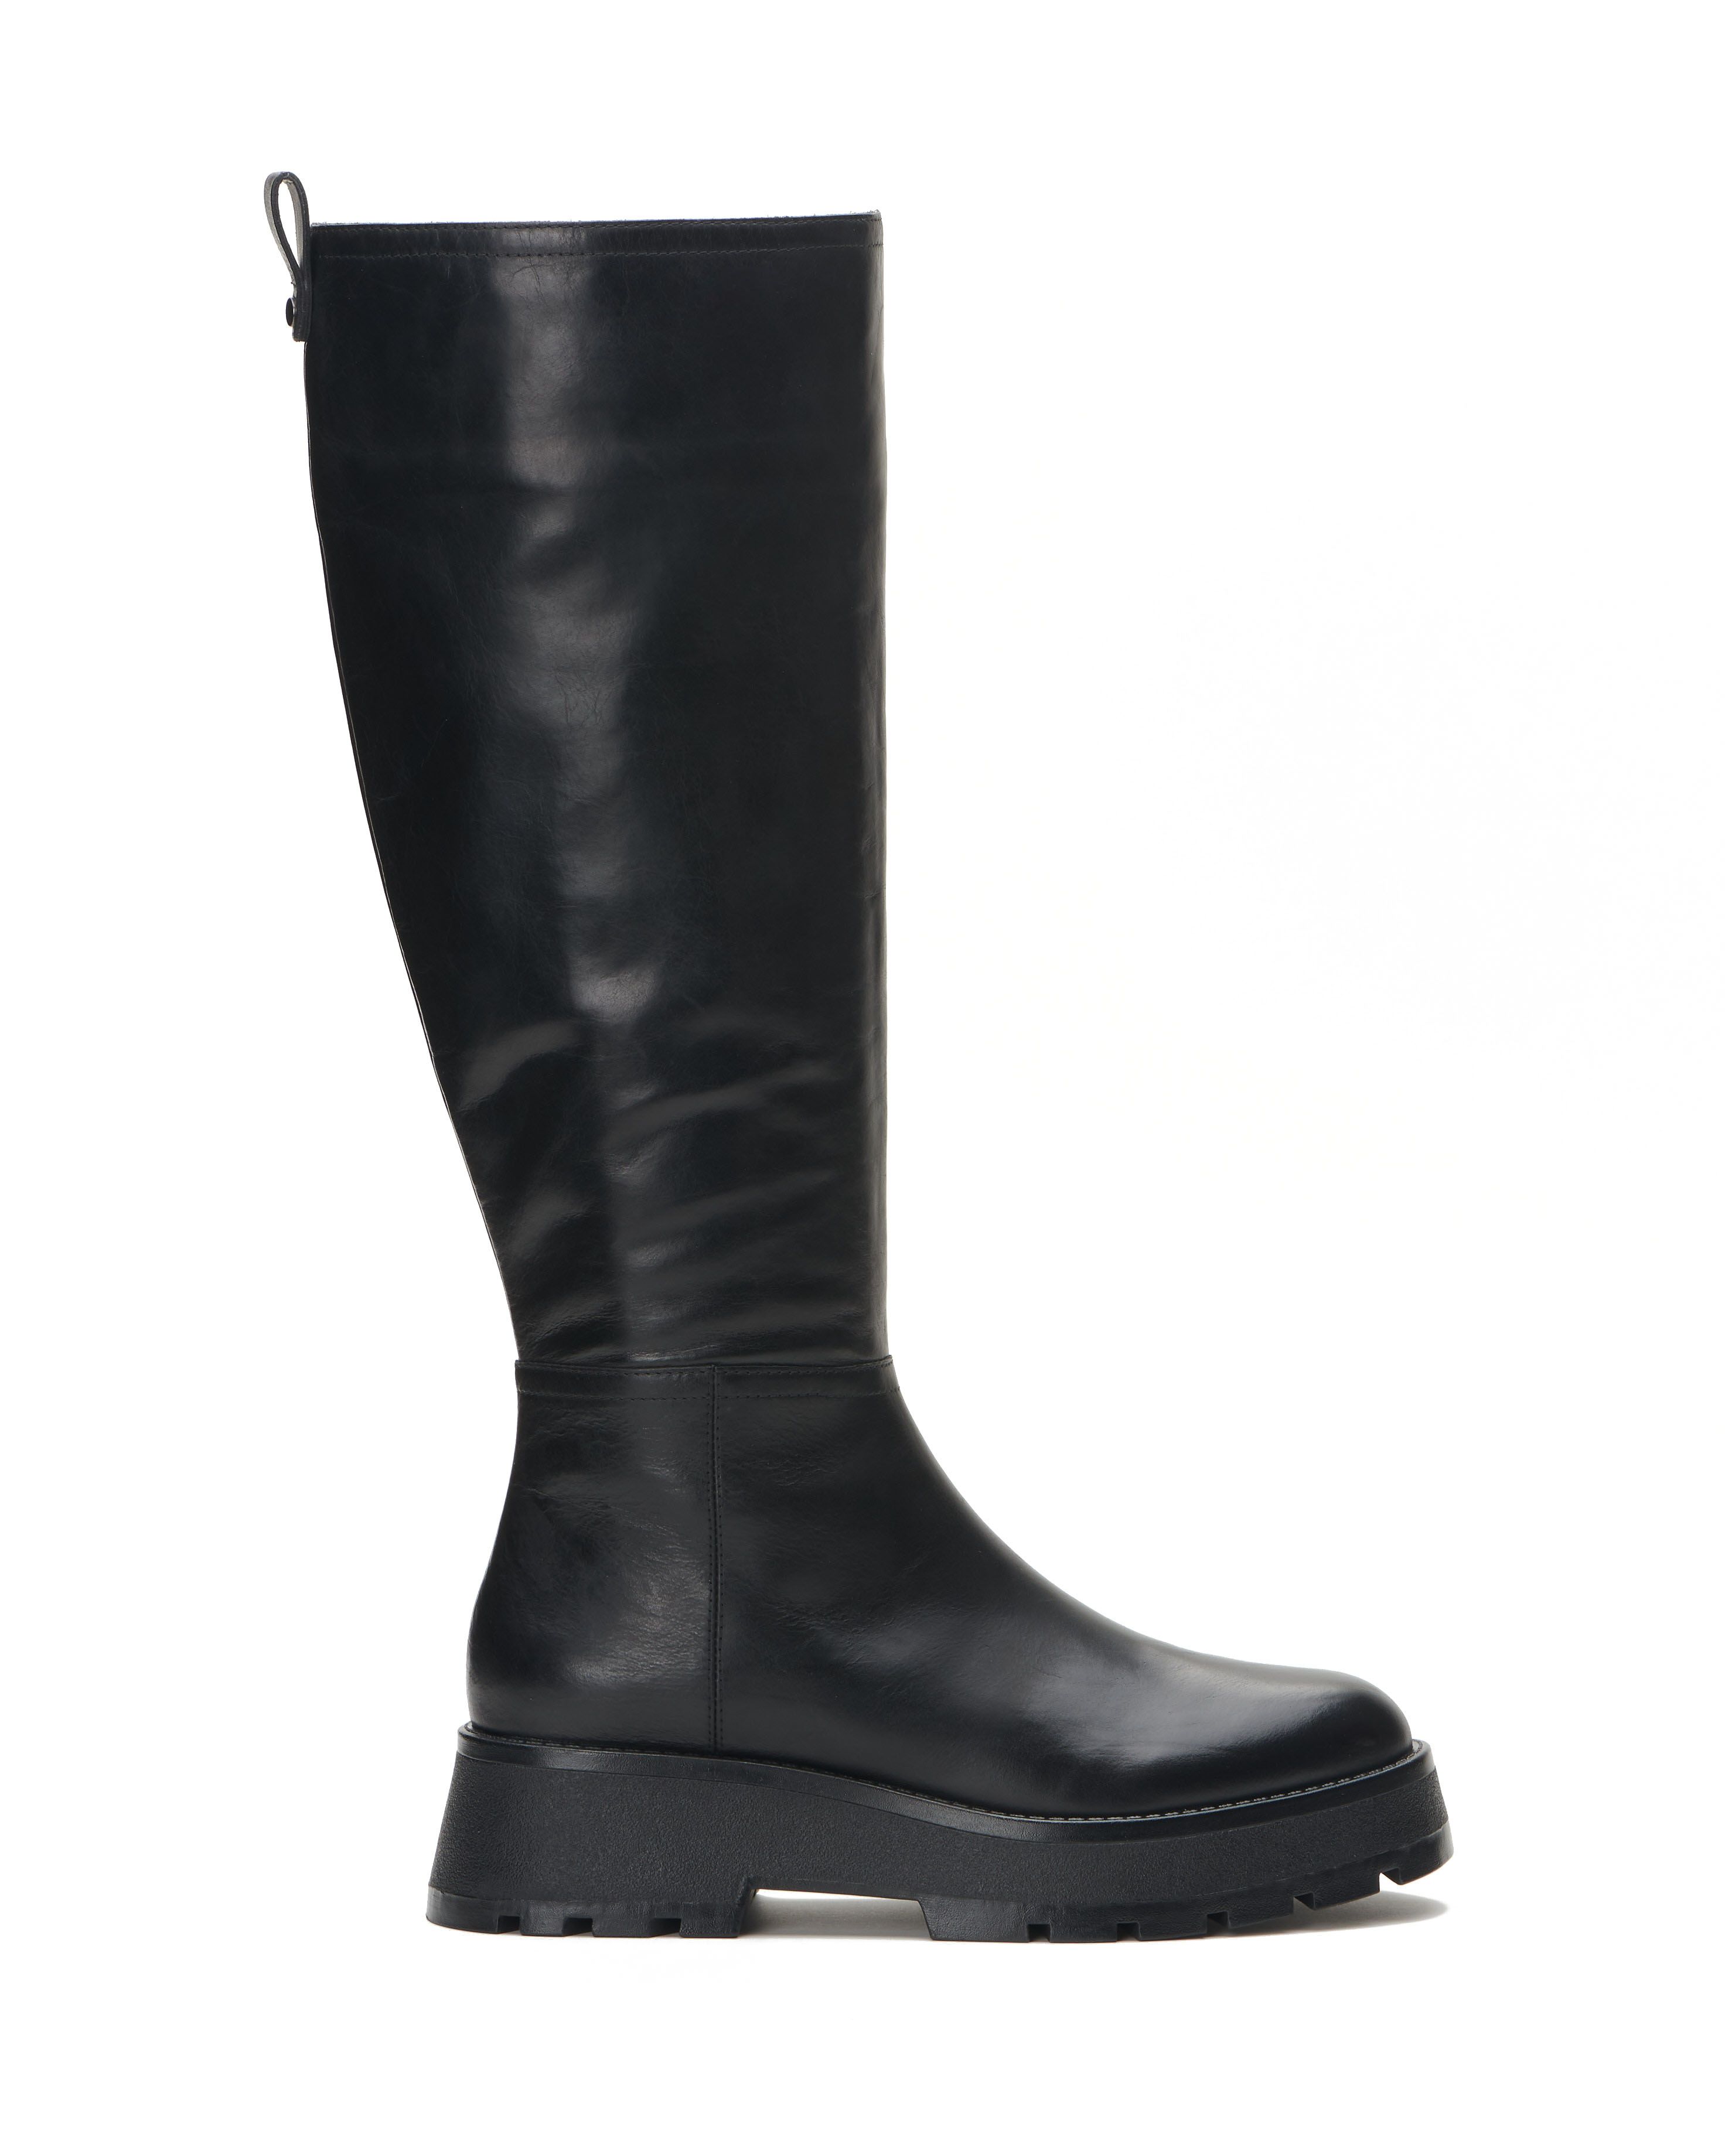 Vince Camuto Nettrio Boot | Vince Camuto